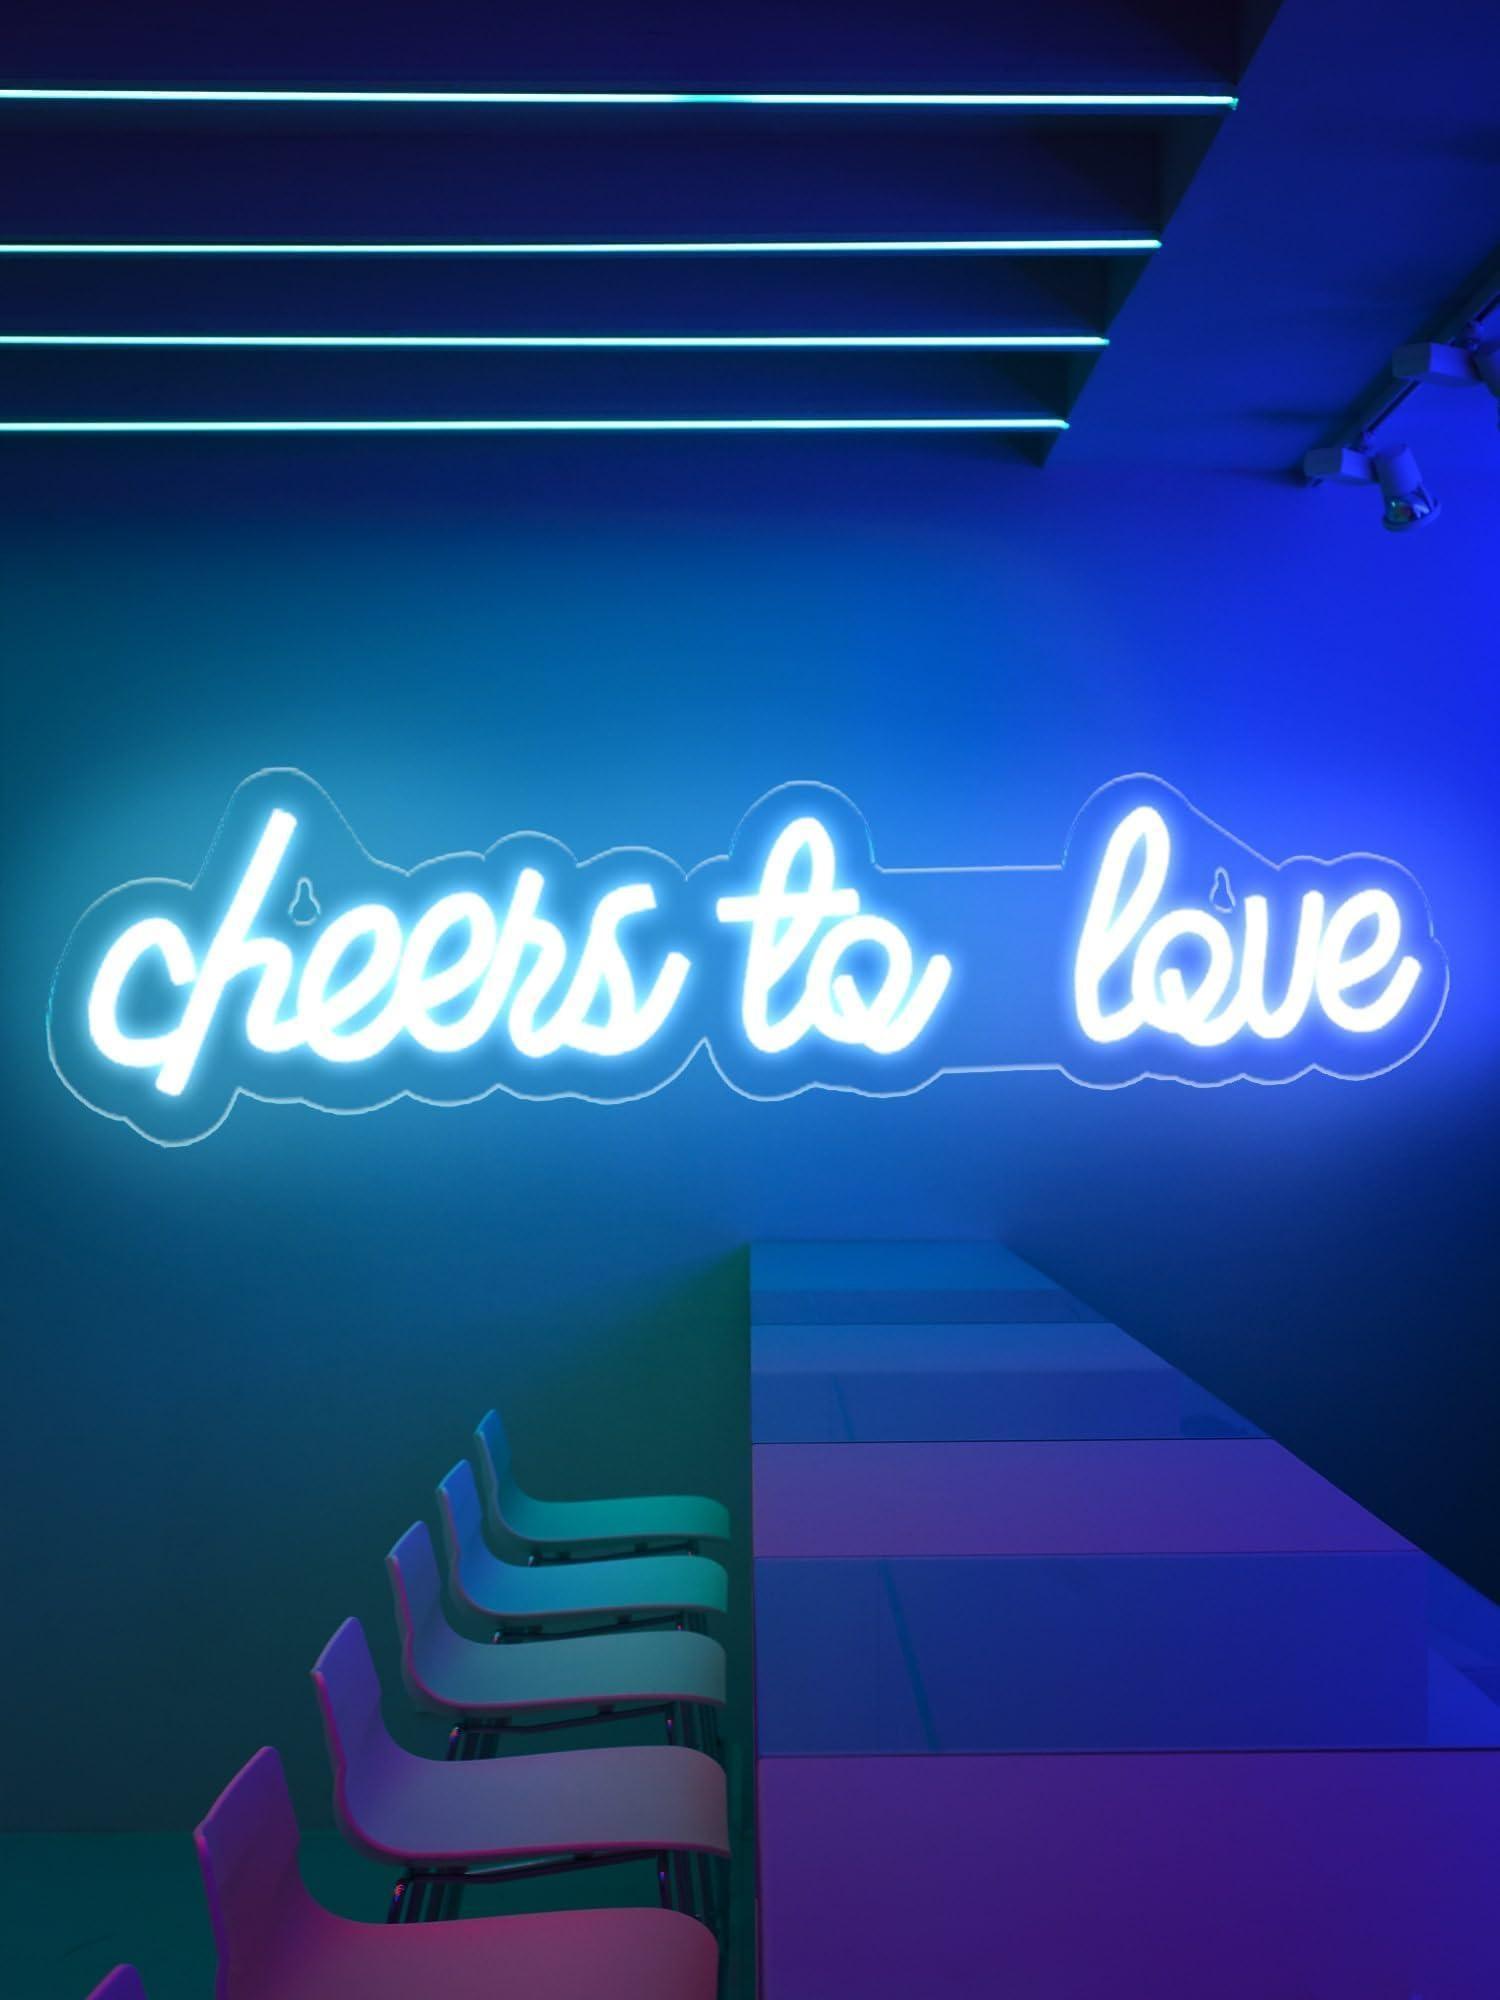 Cheers To Love Neon Sign Neon Lights 17.7 x 3.9 in Neon Signs For Wall Decor USB Powered Led Signs For Bedroom Wall LED Neon Signs Neon Lights For Bedroom Valentines Day Decor - Loomini